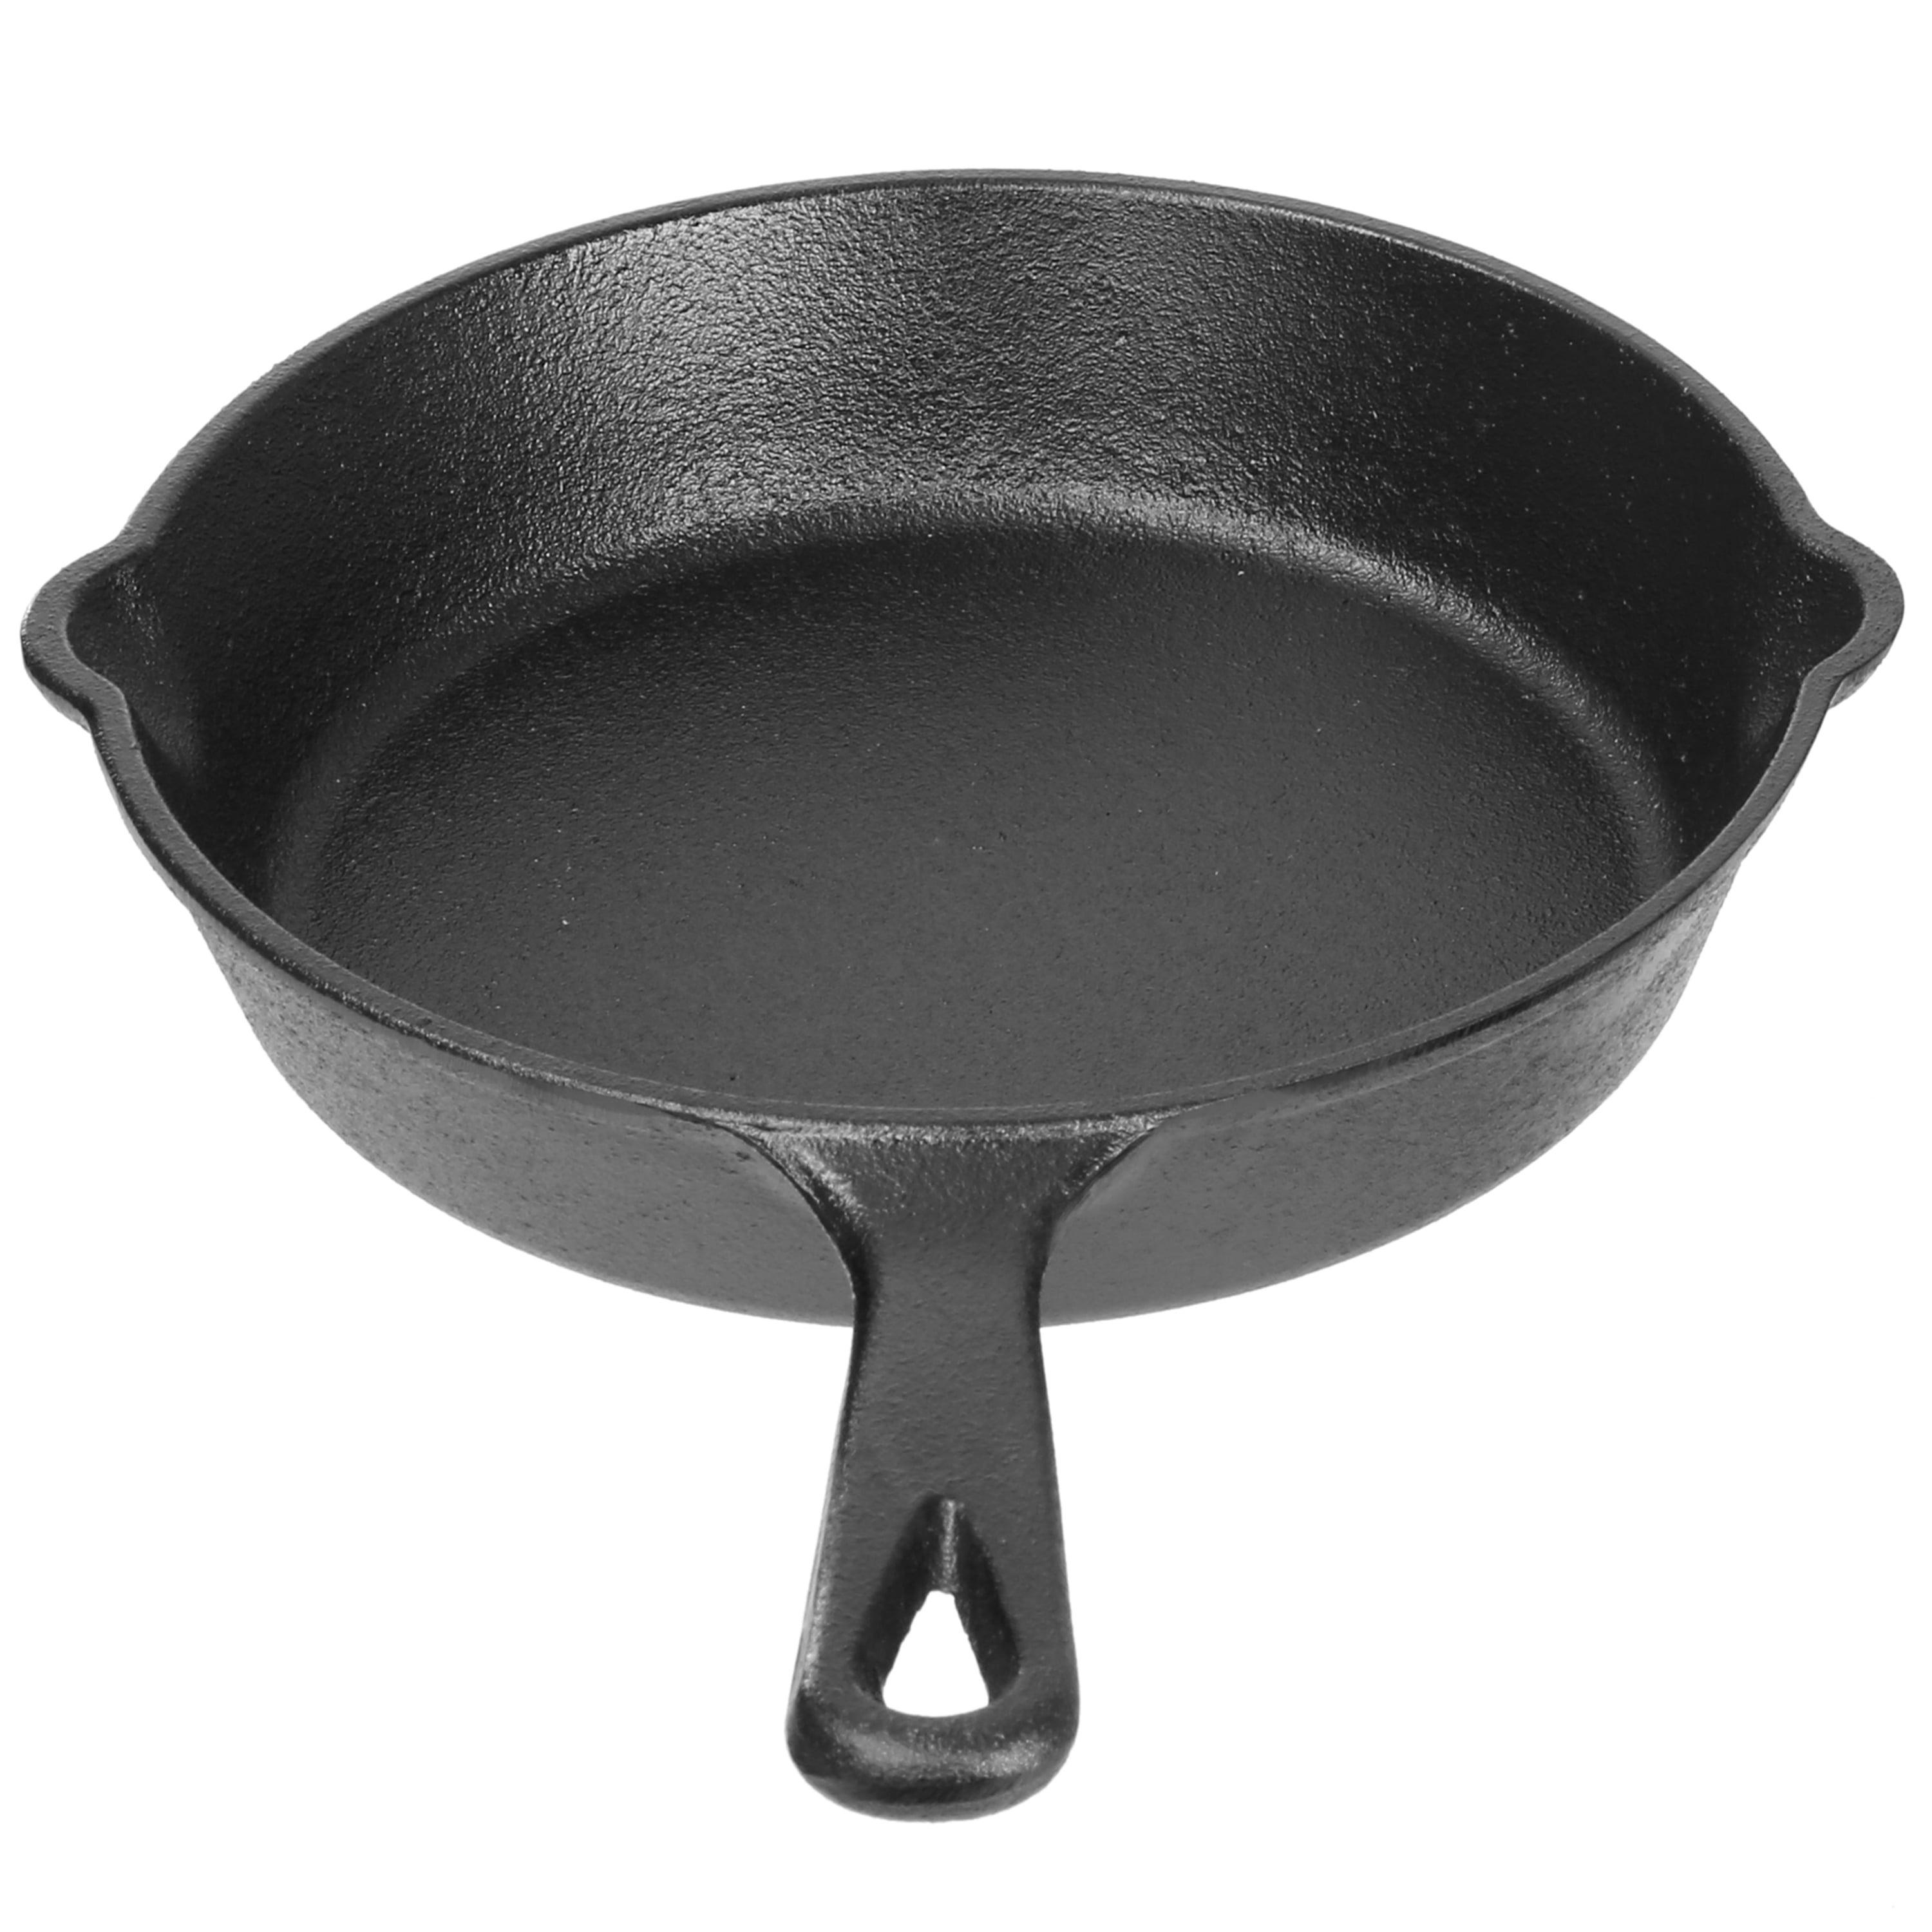 Mainstays 12-Inch Cast Iron Skillet Induction, Ceramic, Electric Compatible